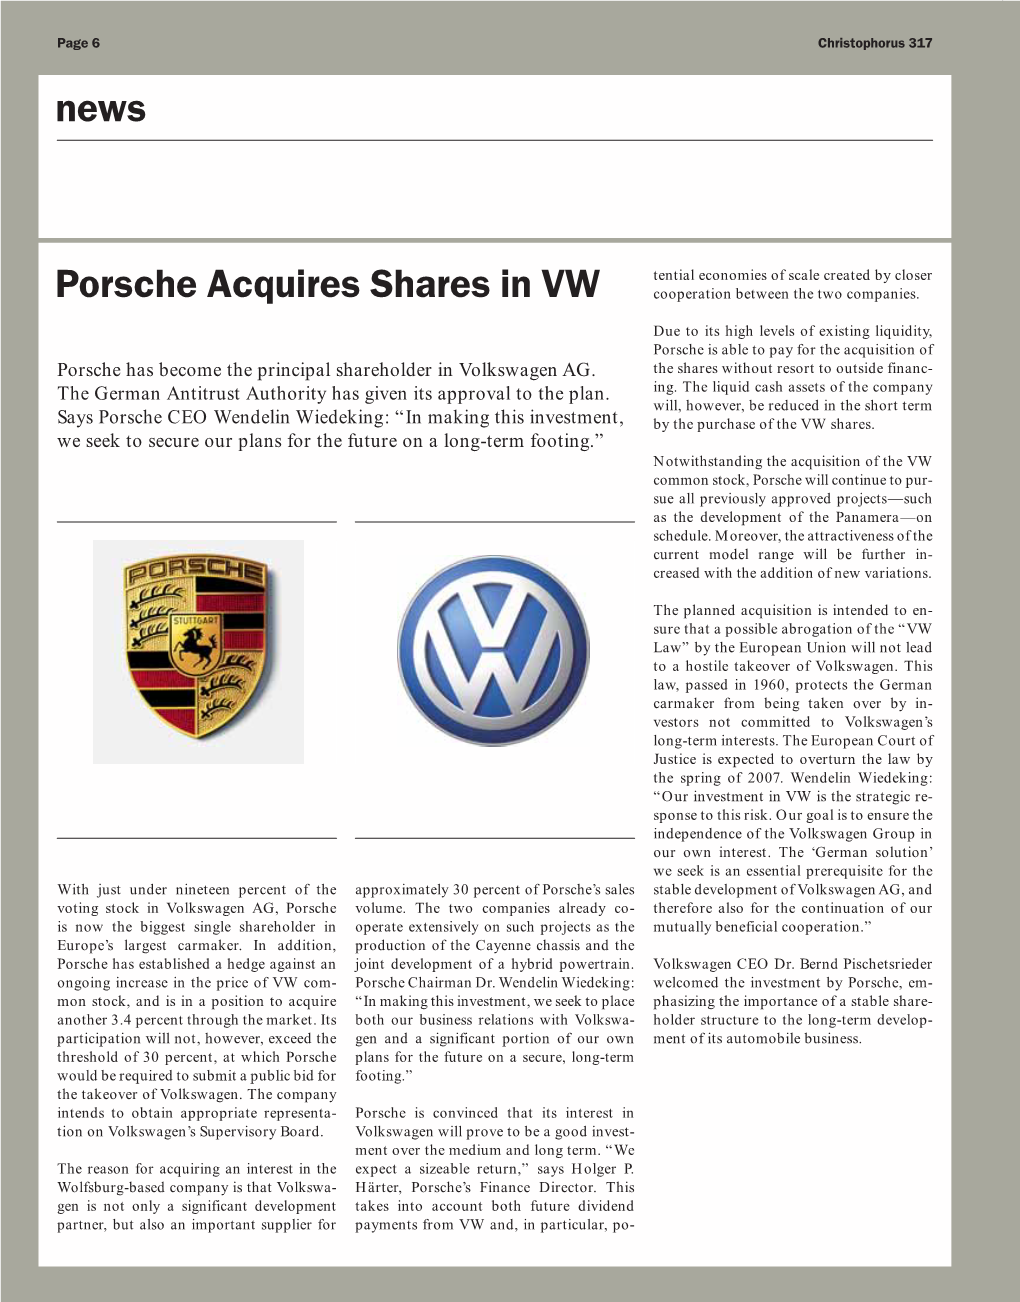 News Porsche Acquires Shares in VW